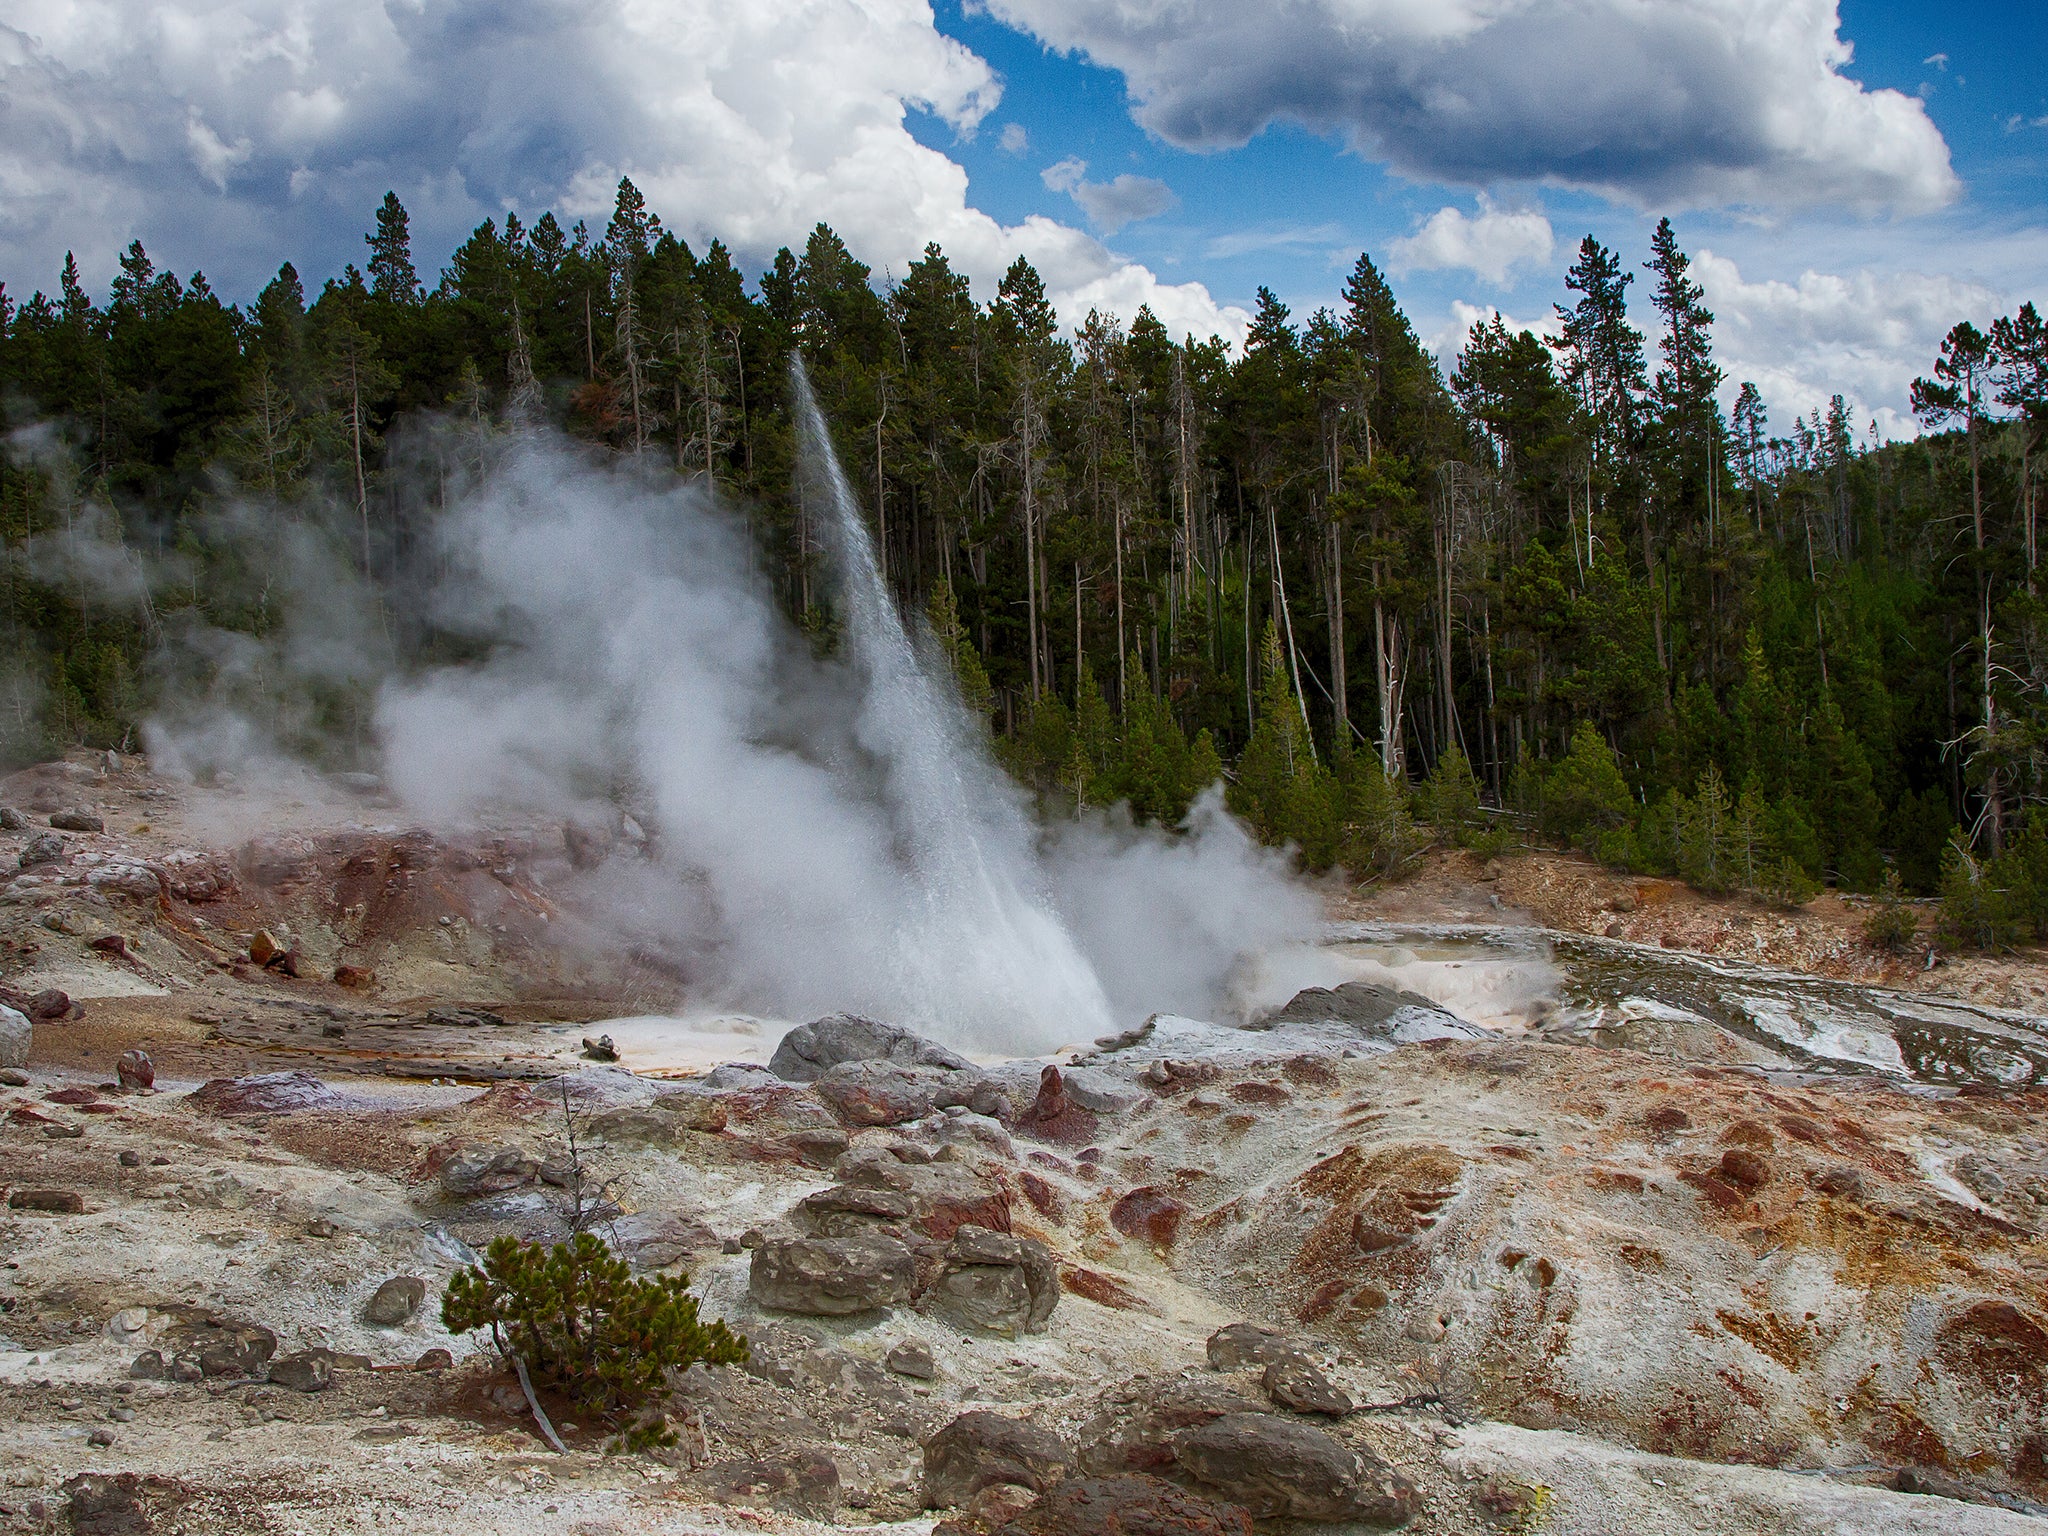 Steamboat Geyser erupts in Yellowstone National Park